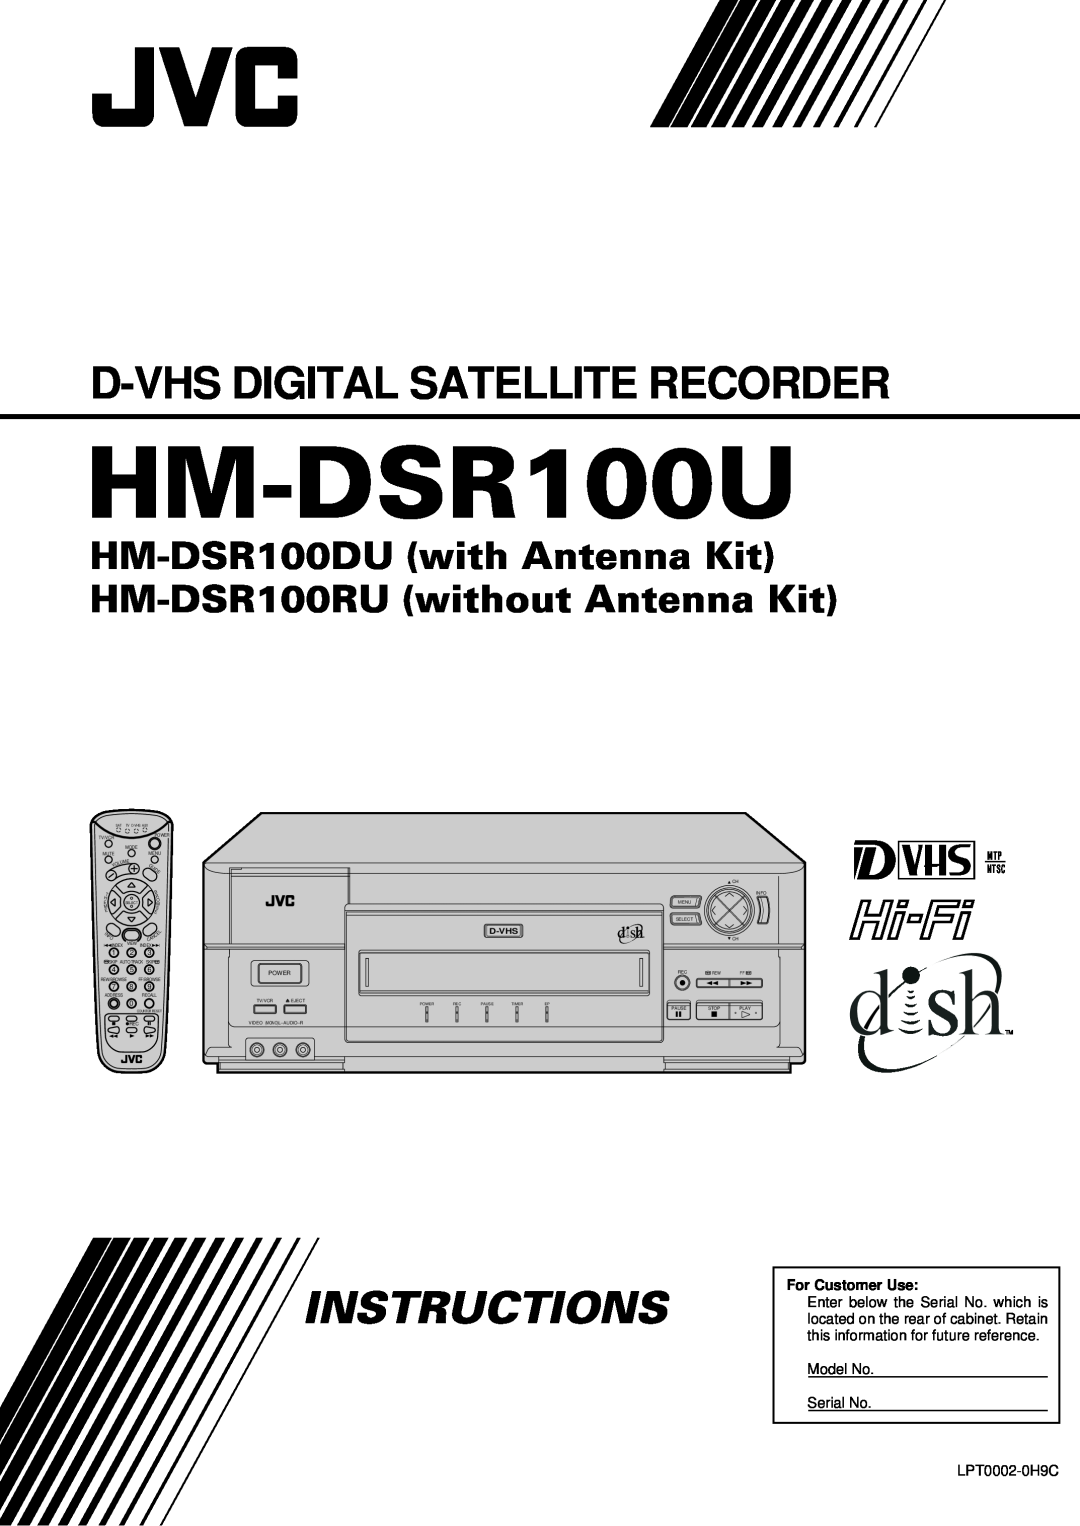 JVC HM-DSR100U, HM-DSR100DU, HM-DSR100RU manual D-Vhs Digital Satellite Recorder, Instructions, For Customer Use, Model No 